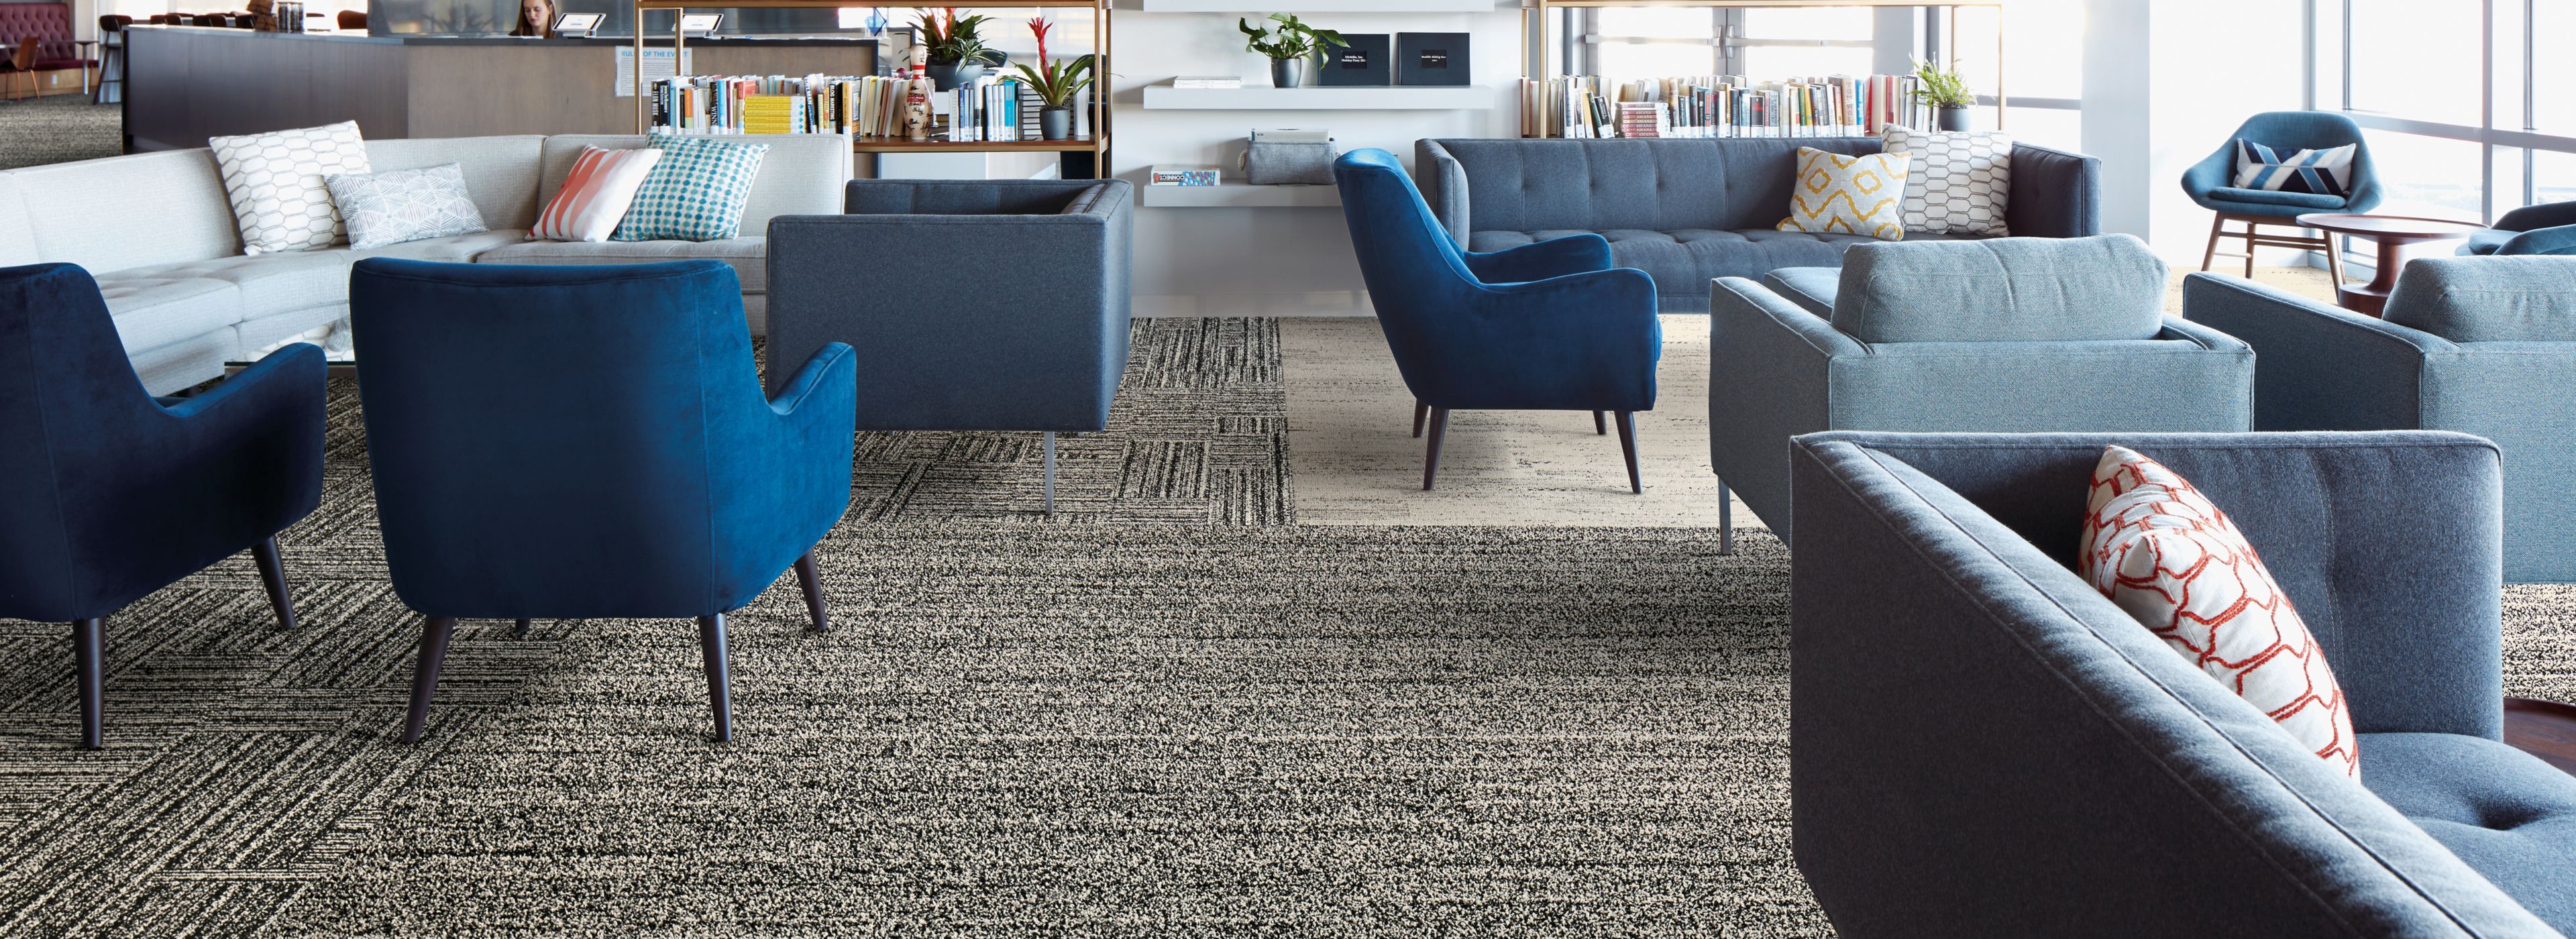 Interface Overedge plank carpet tile in open lounge area with chairs and couches Bildnummer 1